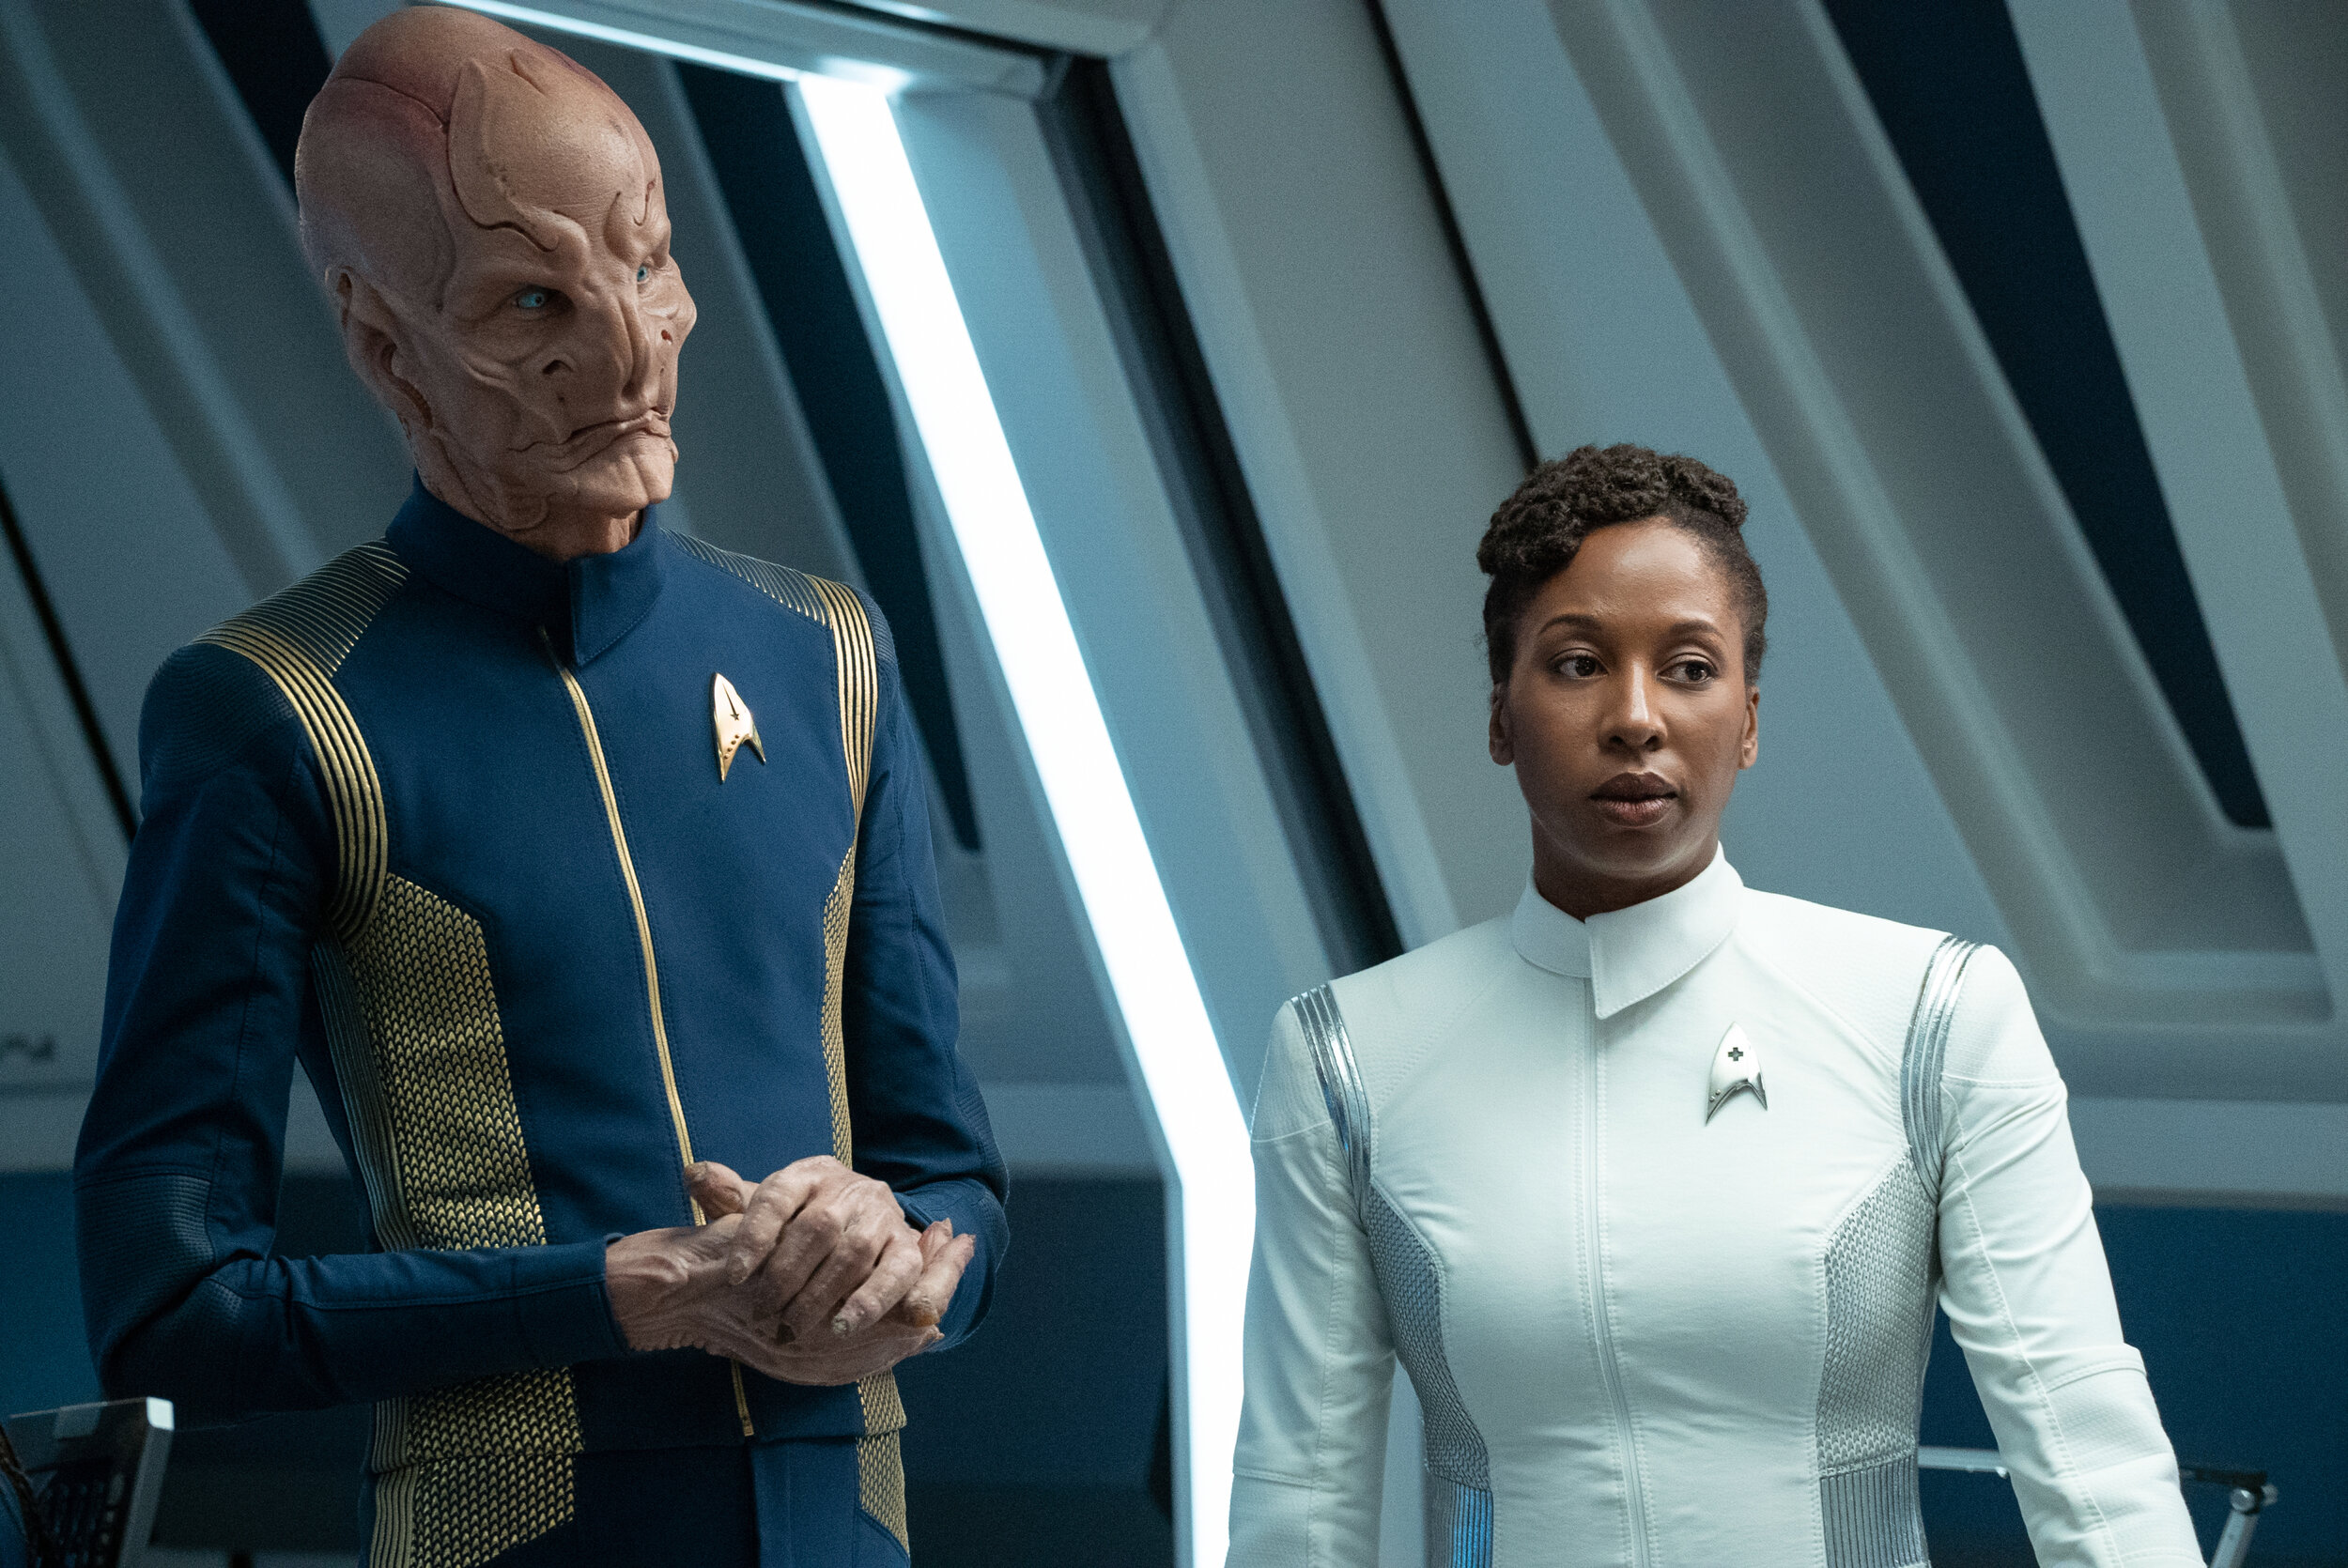   "Forget Me Not" -- Ep#304 -- Pictured: Doug Jones as Saru and Raven Dauda as Doctor Pollard of the CBS All Access series STAR TREK: DISCOVERY. Photo Cr: Michael Gibson/CBS ©2020 CBS Interactive, Inc. All Rights Reserved.  